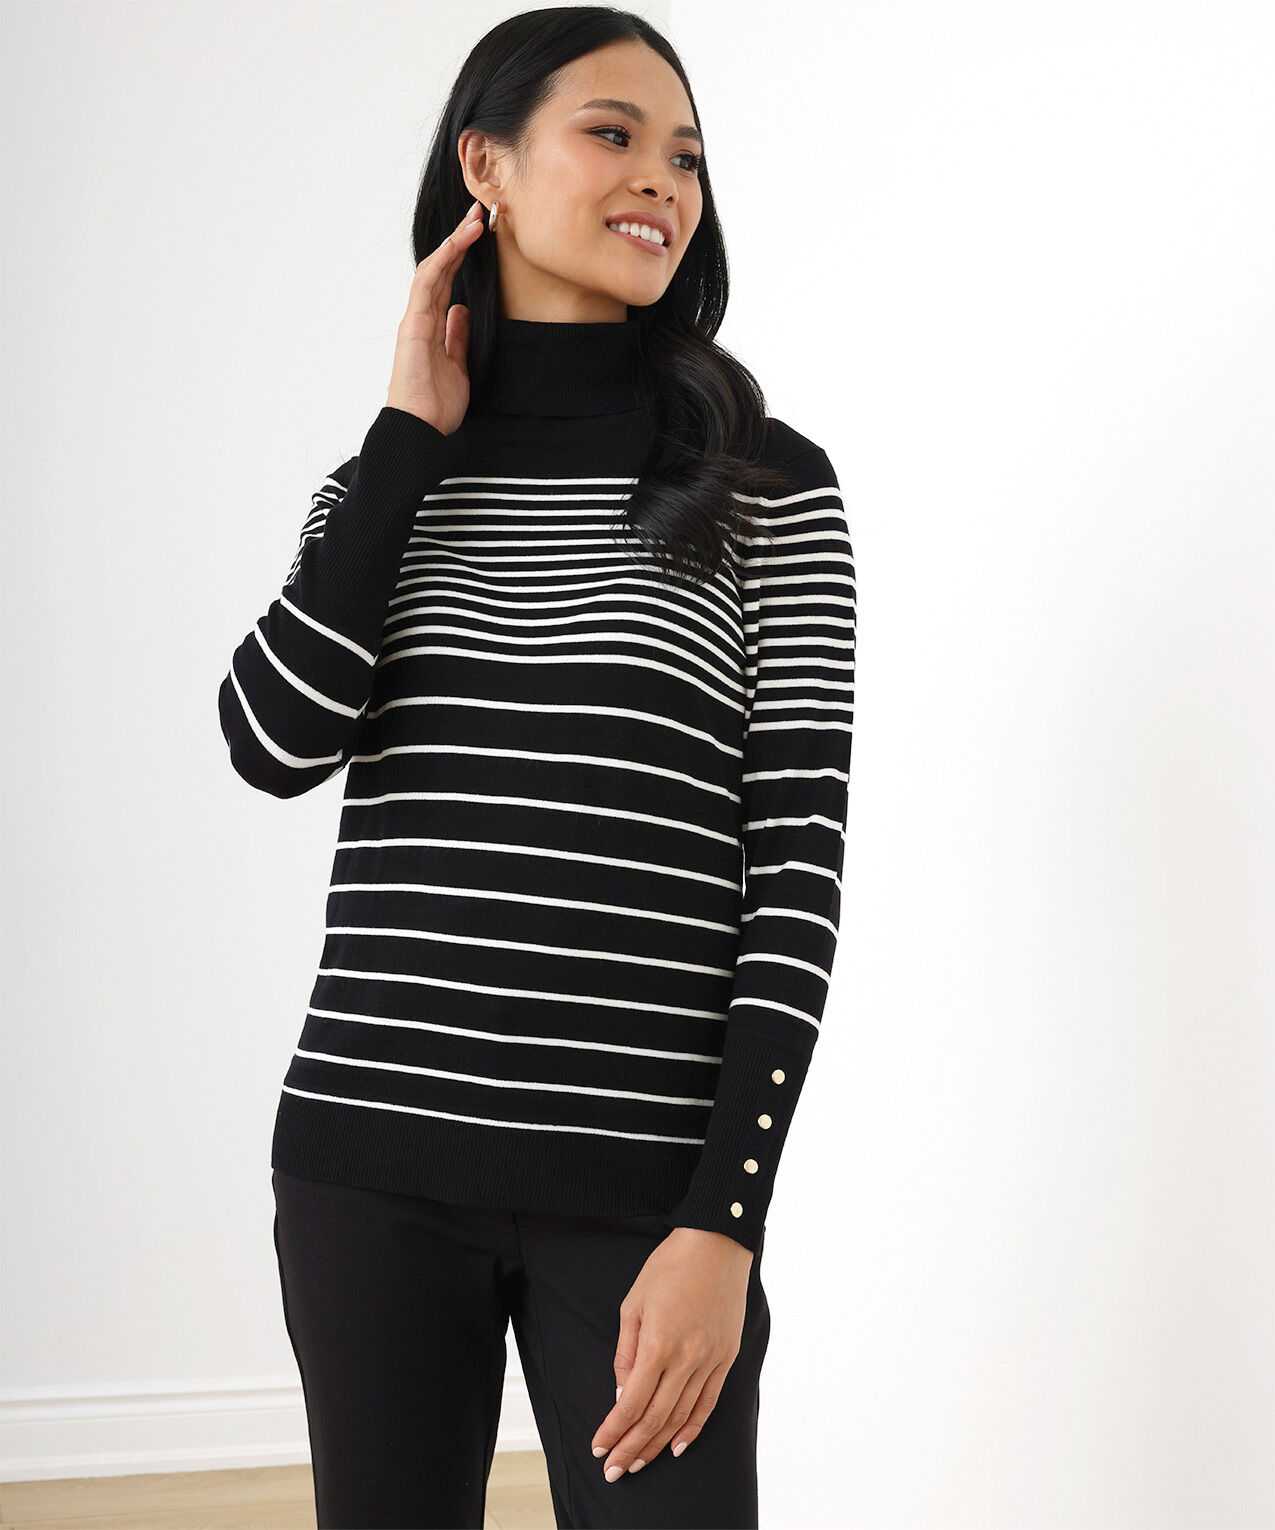 Petite Turtleneck Sweater with Button Detail